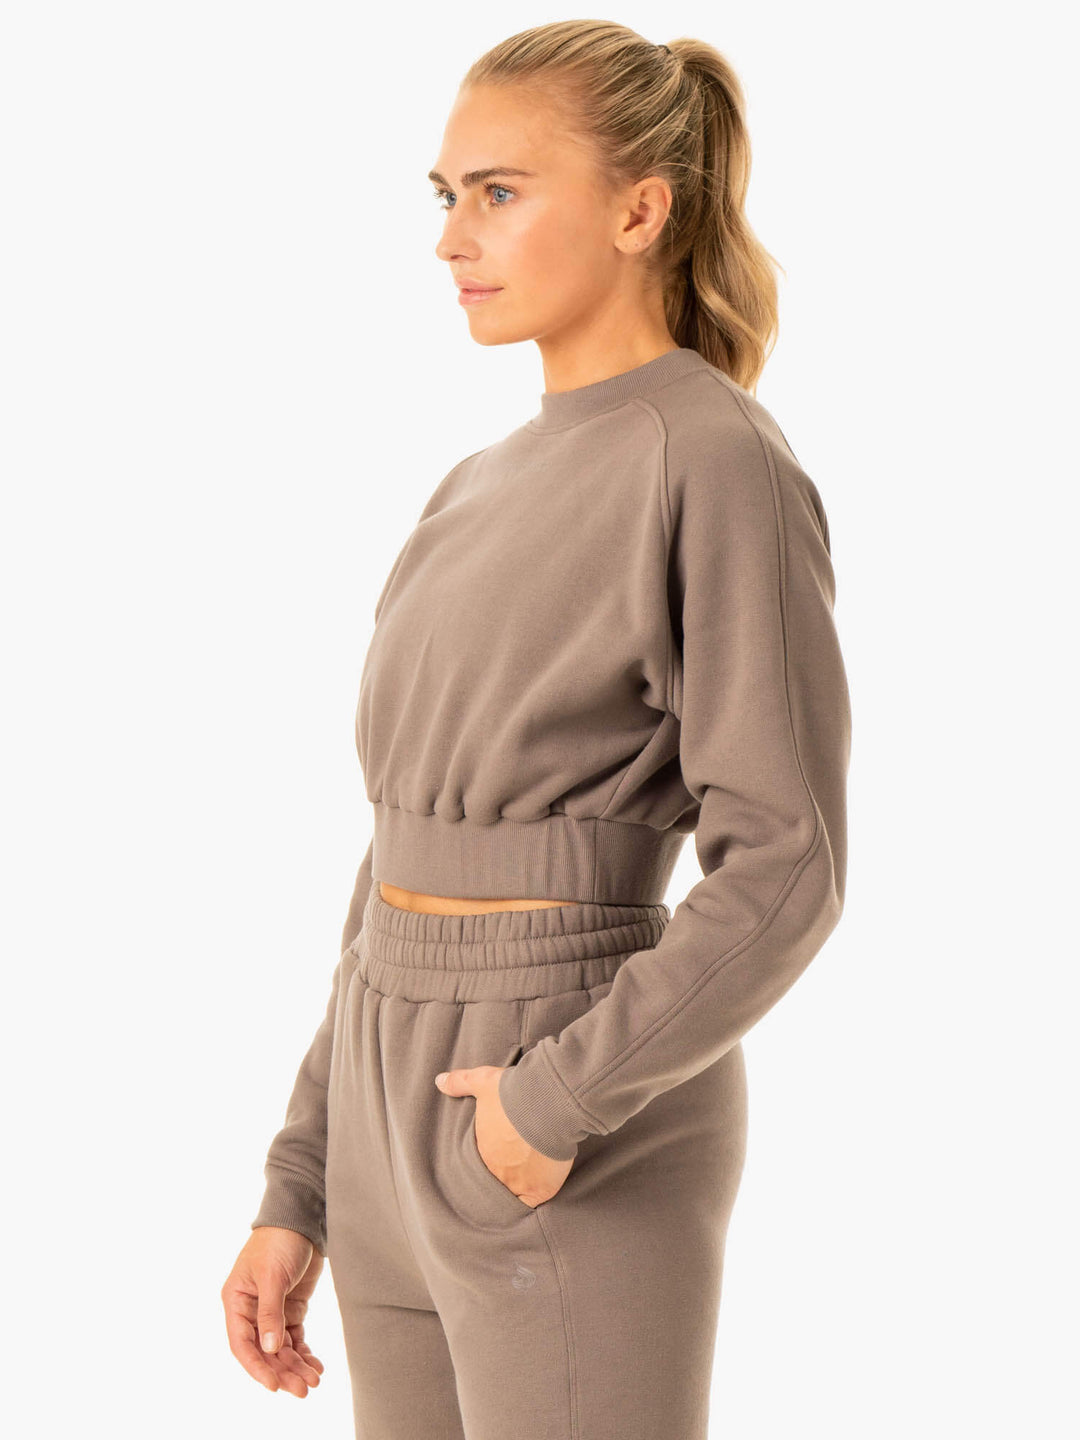 Sideline Sweater - Taupe Clothing Ryderwear 